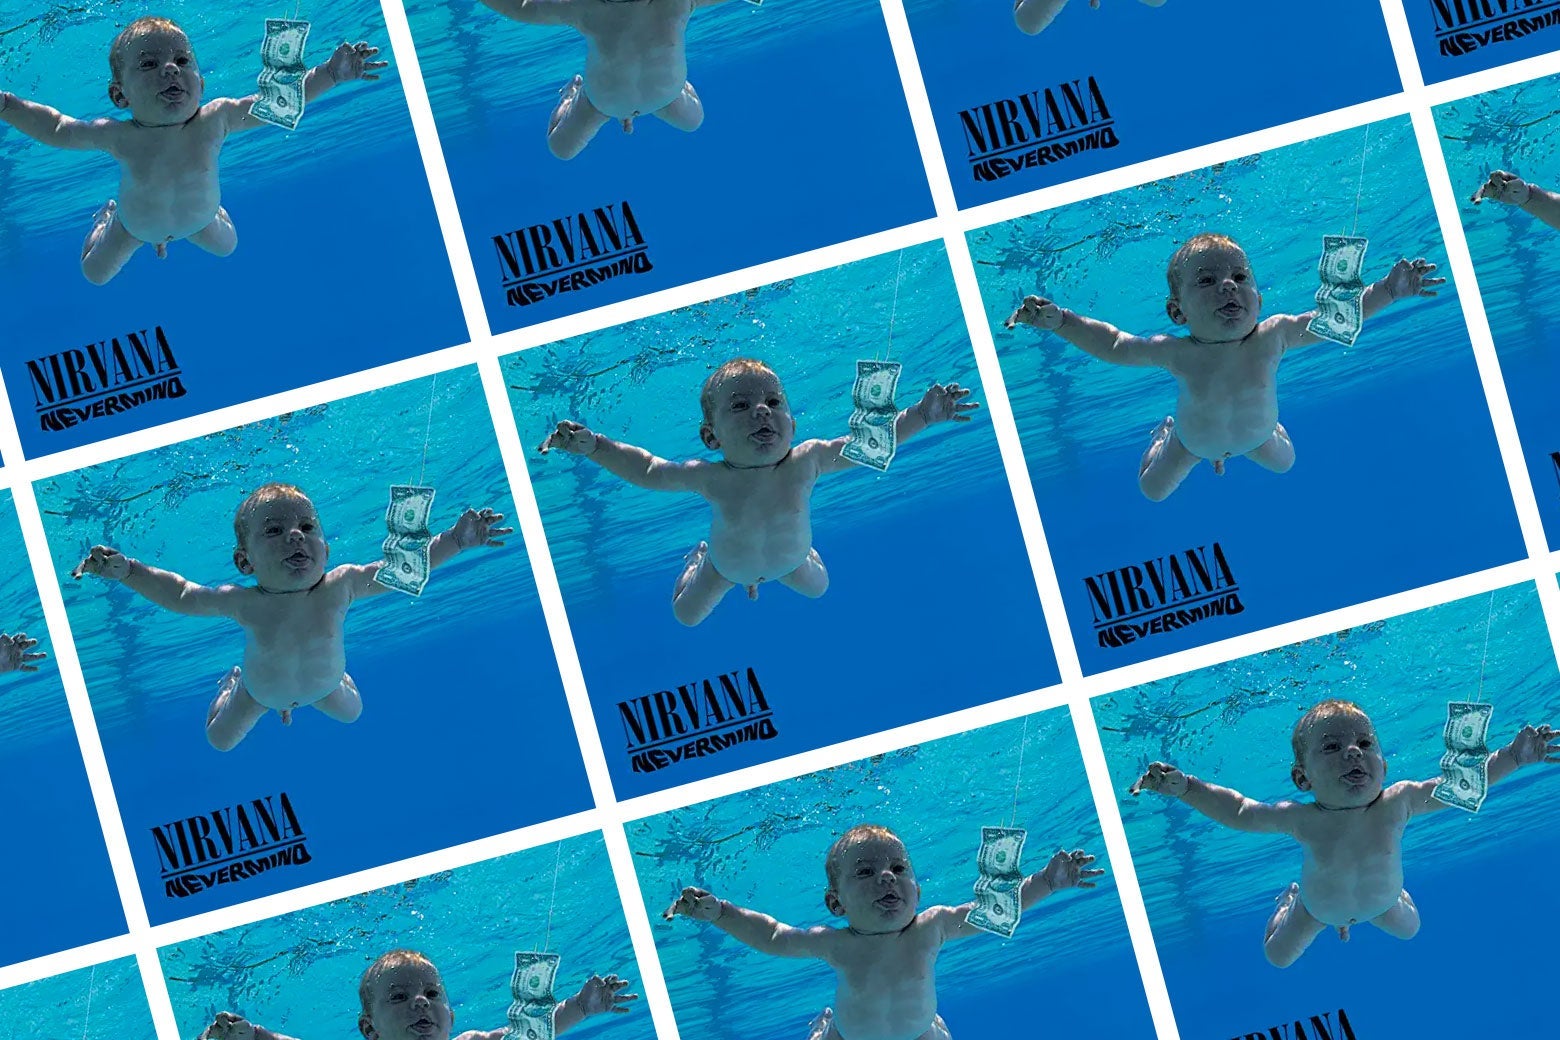 Tiled image of Nirvana's Nevermind album cover